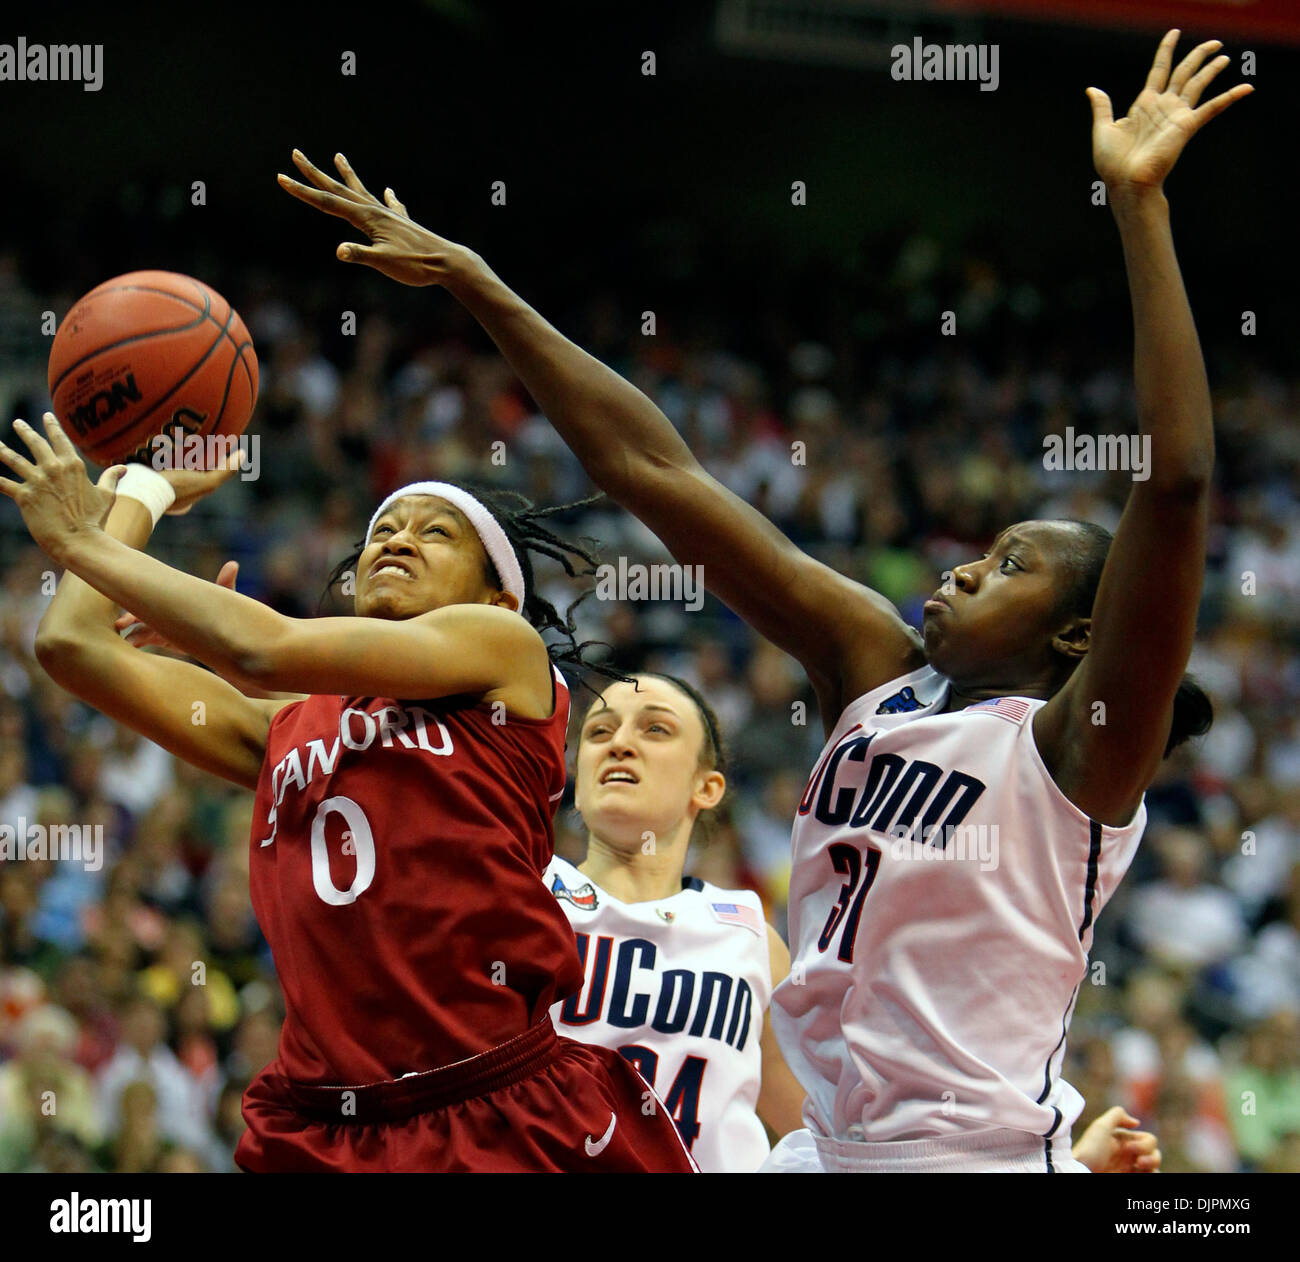 Apr. 06, 2010 - San Antonio, TX, USA - Stanford's Melanie Murphy drives to the hoop Tuesday night April 6, 2010 at the Alamodome in San Antonio, Texas during the NCAA Women's Final Four Championship game while UConn's Kelly Faris, center, and Tina Charles defend her. (Credit Image: © San Antonio Express-News/ZUMApress.com) Stock Photo